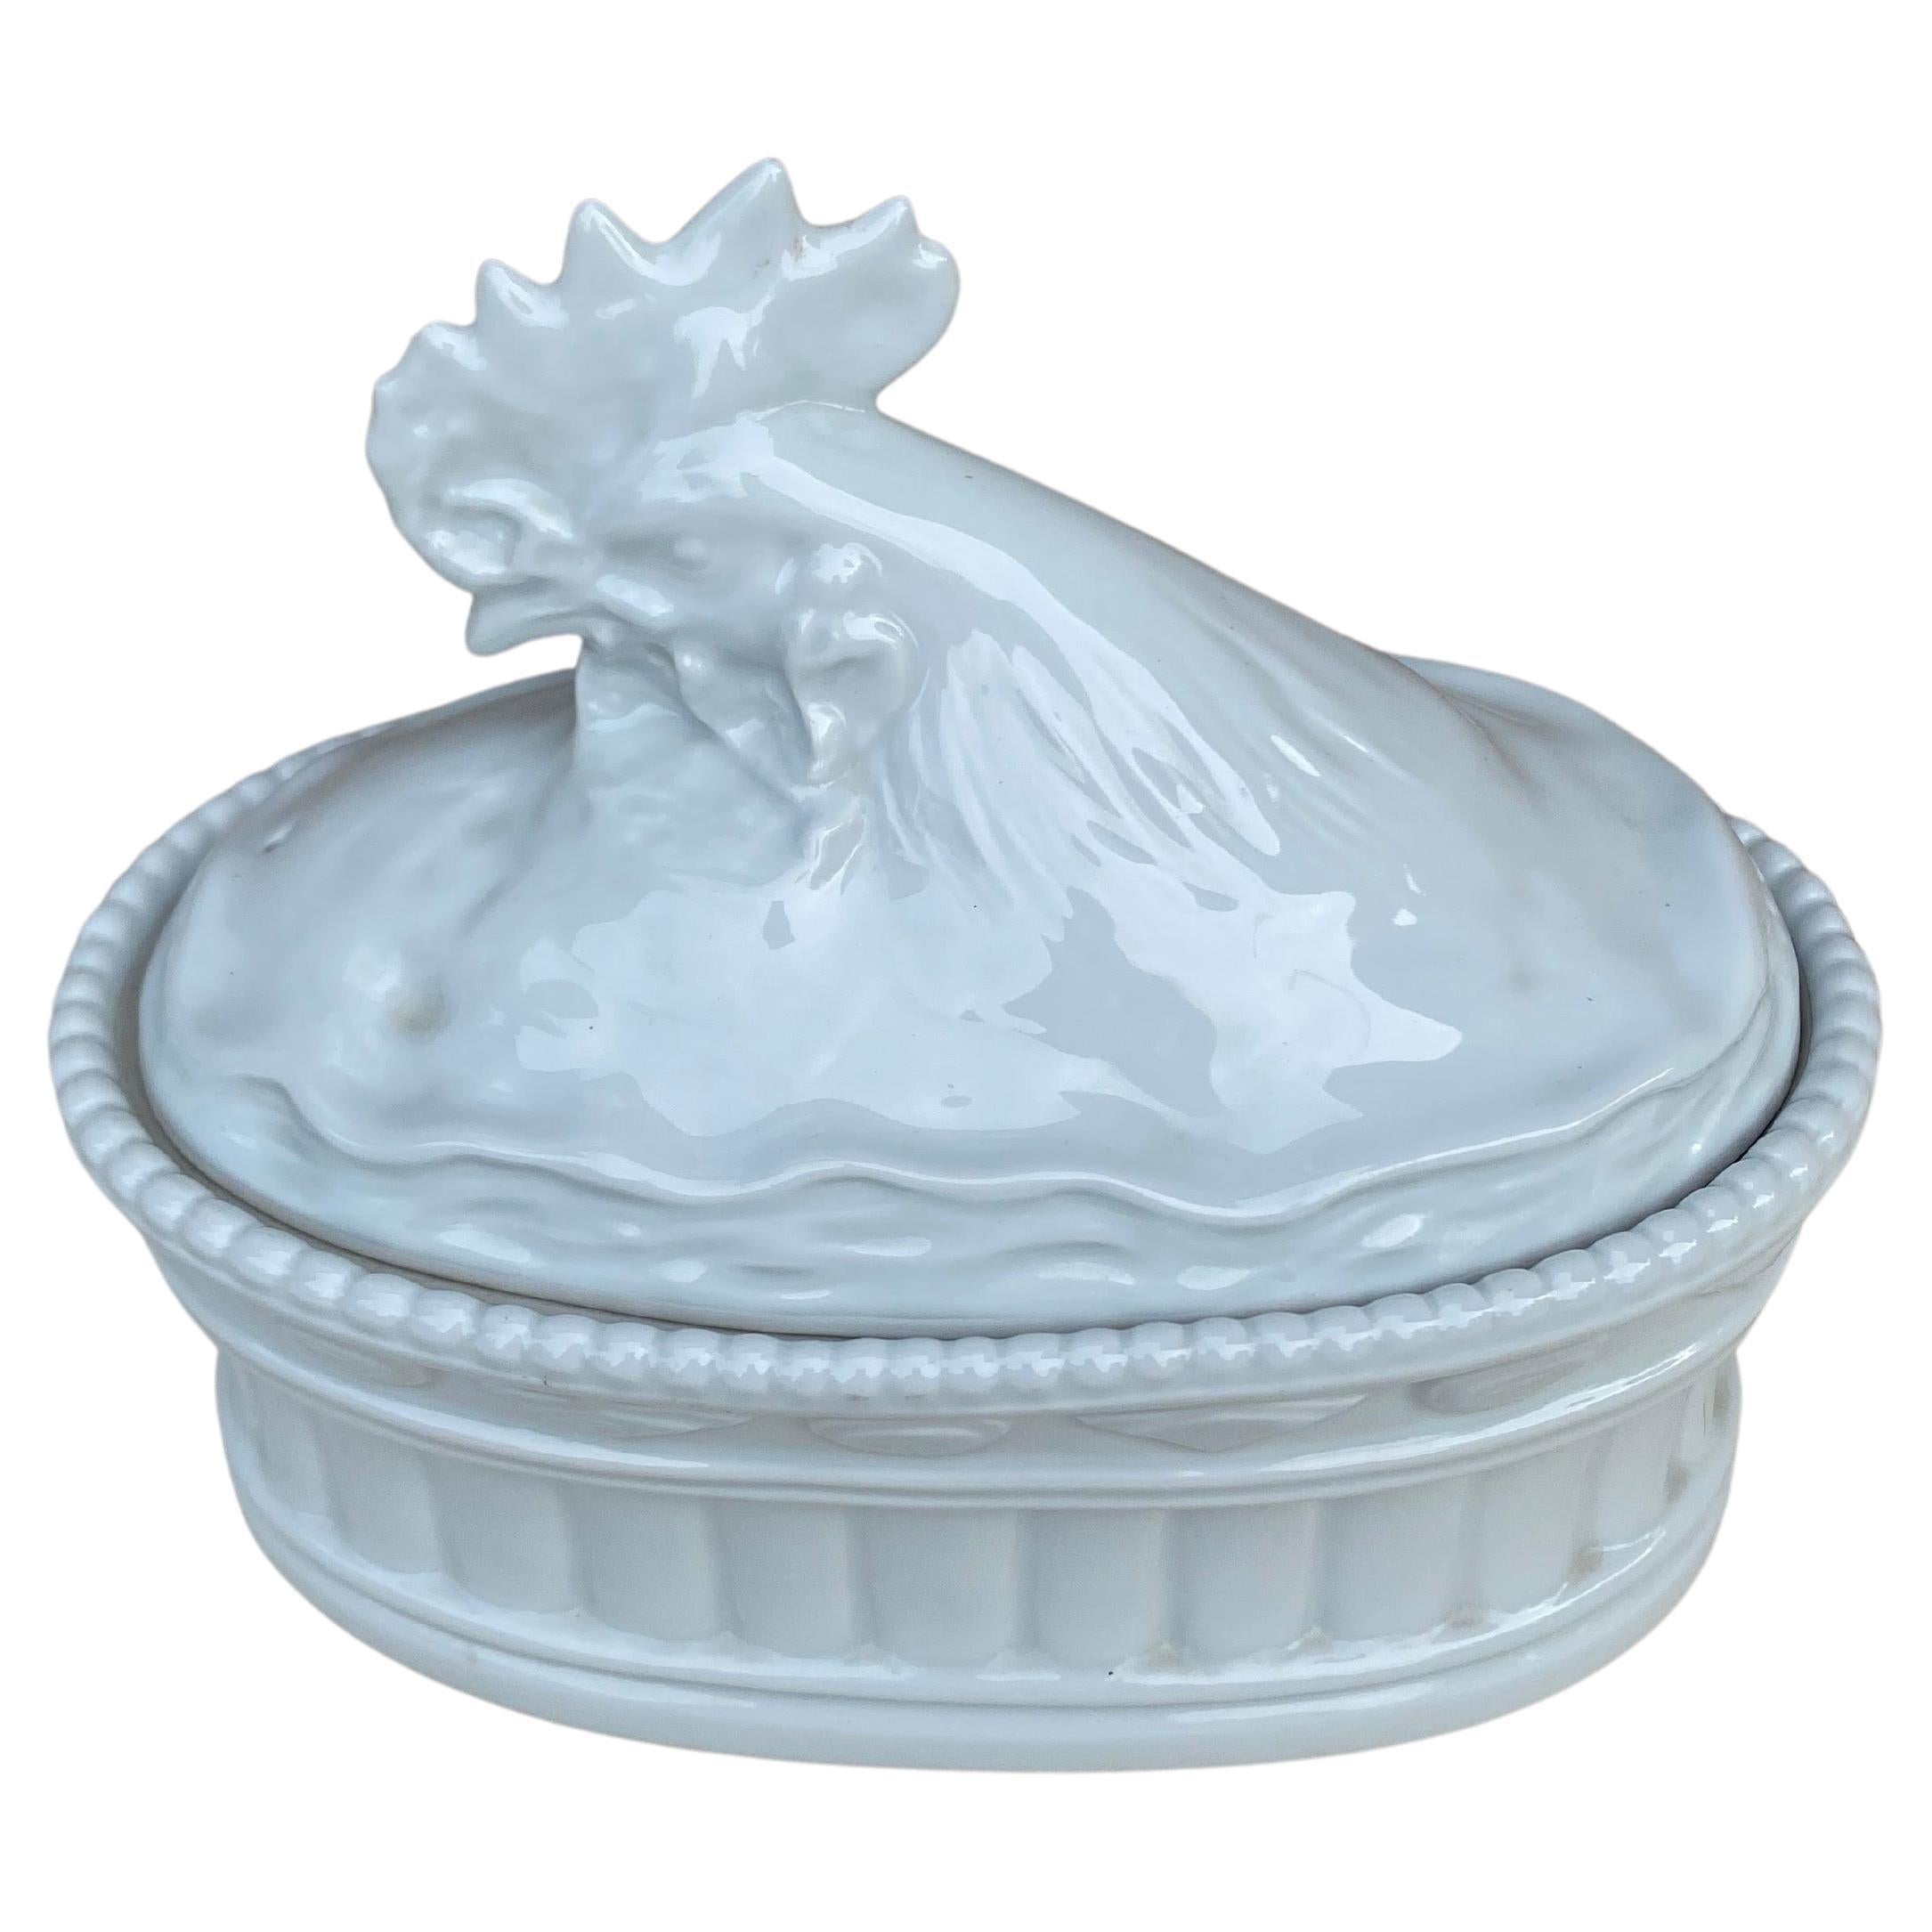 French trompe l oeil white porcelain Rooster Pate tureen circa 1950.